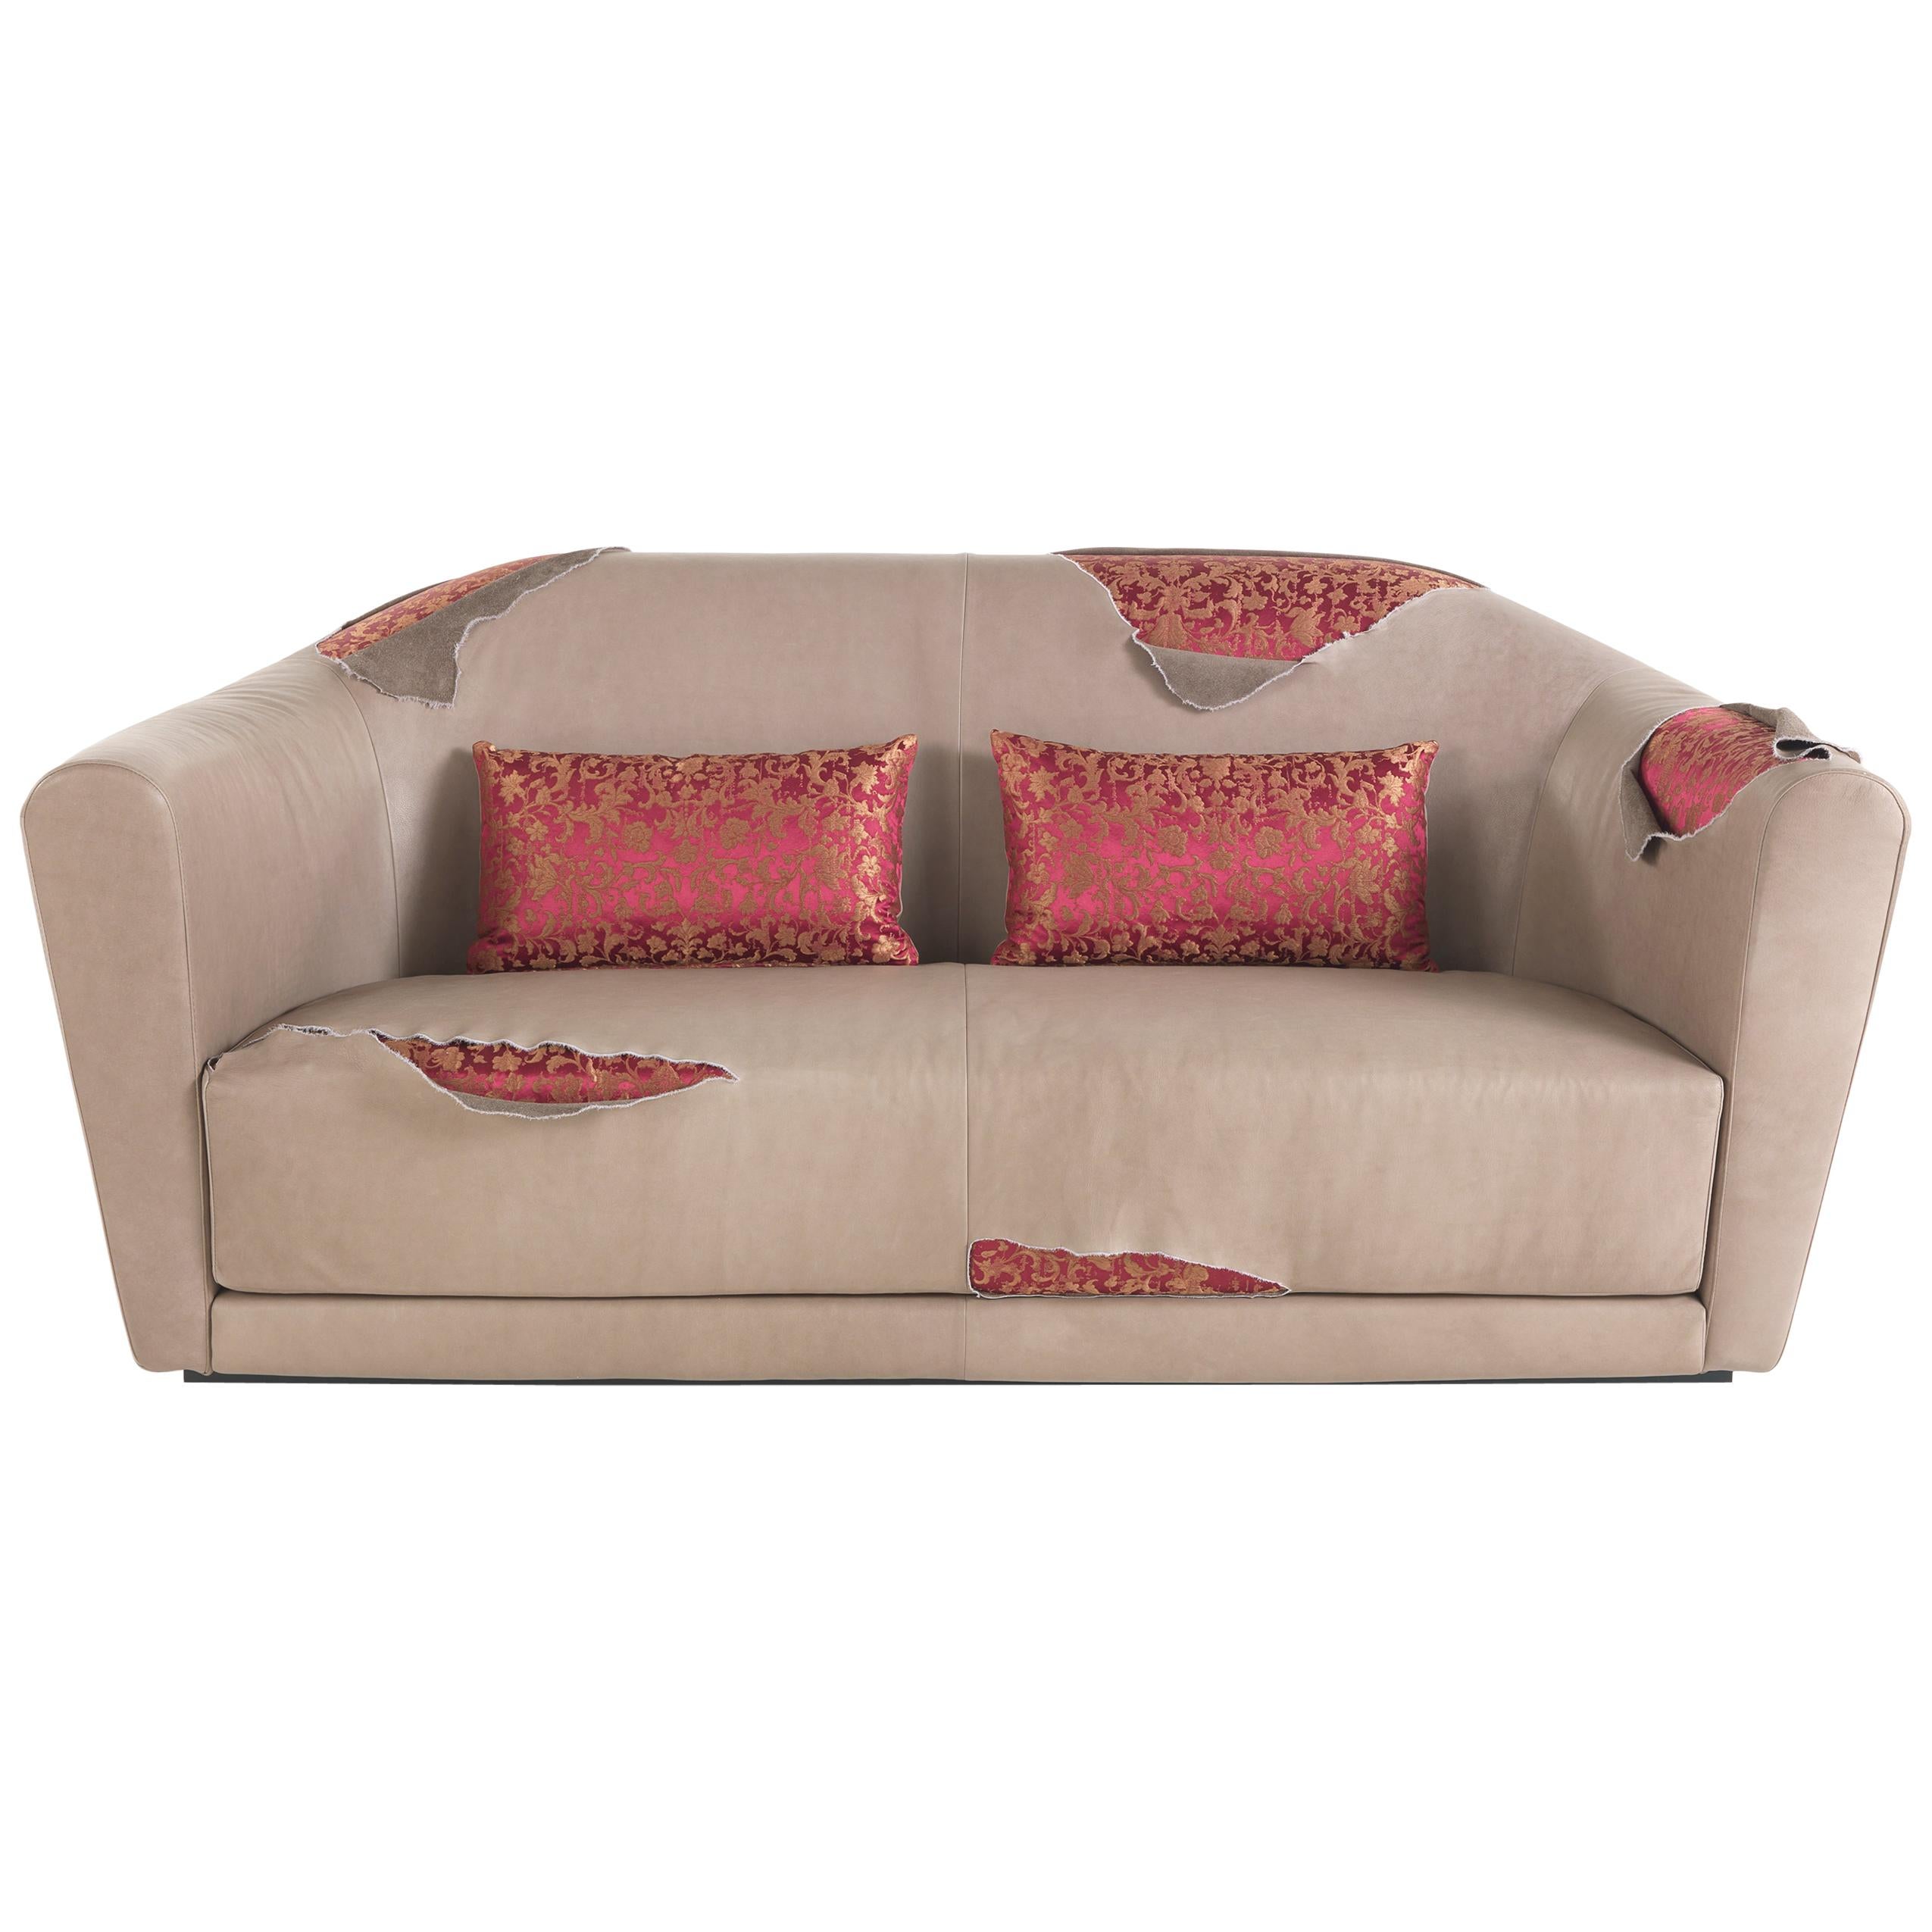 For Sale: Beige (Taupe ) 21st Century Fylgrade Sofa in Leather and Historical Fabric by CTRLZAK